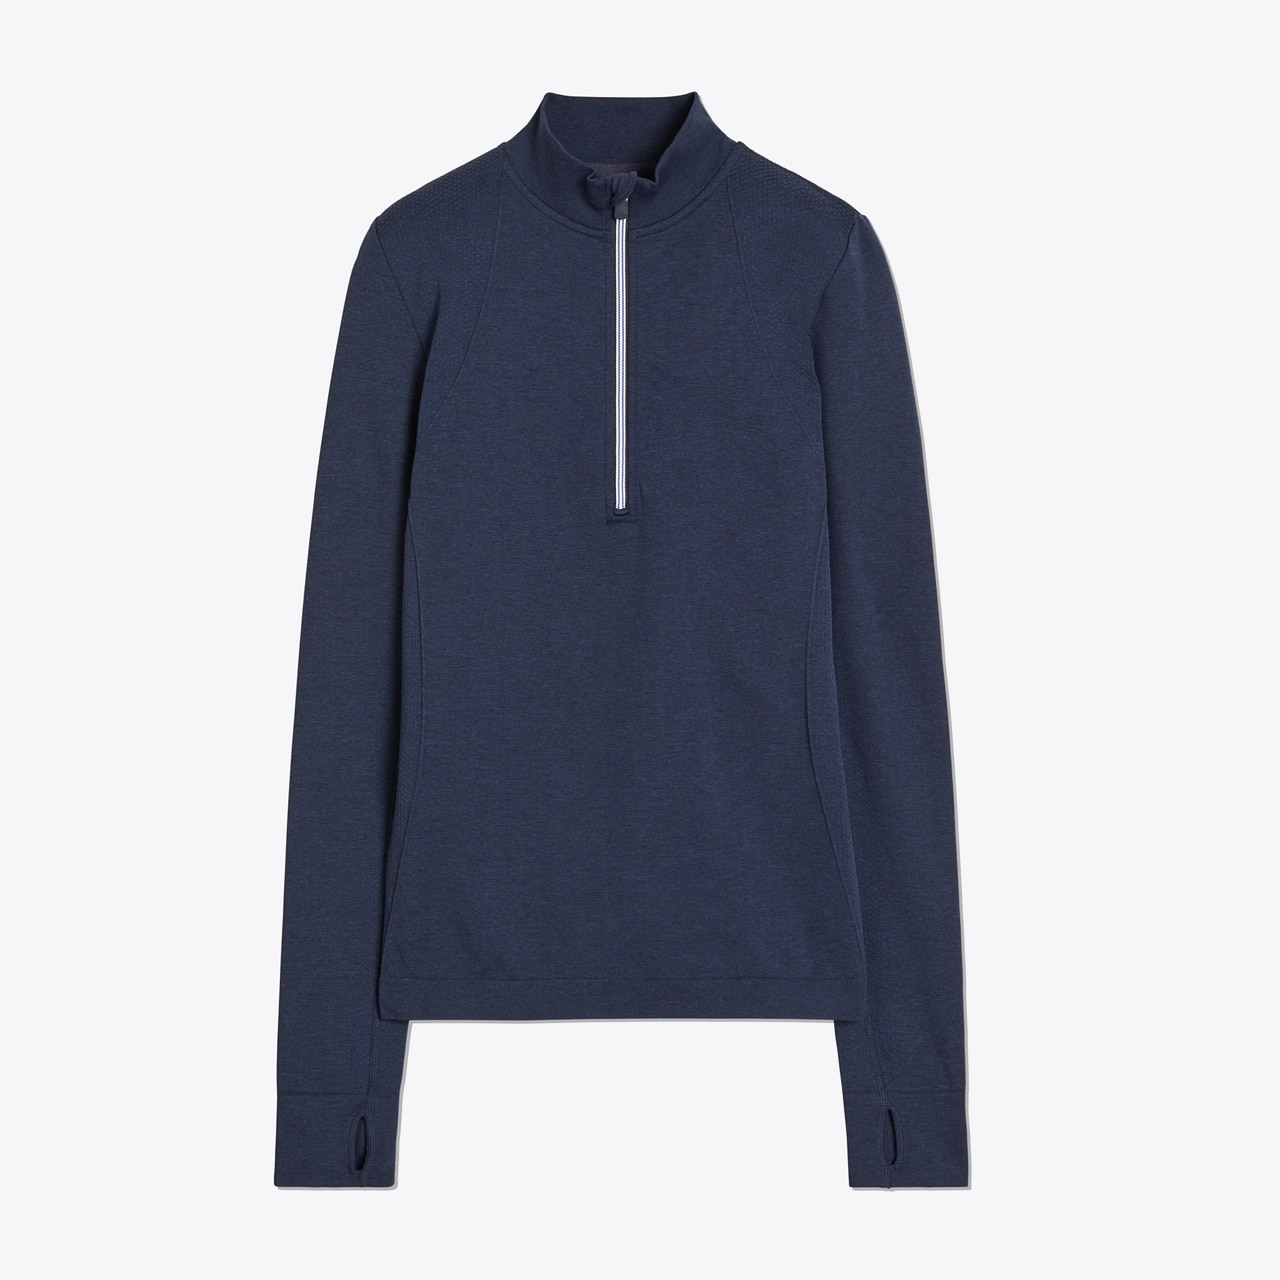 https://s7.toryburch.com/is/image/ToryBurch/style/seamless-quarter-zip-pullover-front.TB_41564_405_SLFRO.pdp-1280x1280.jpg